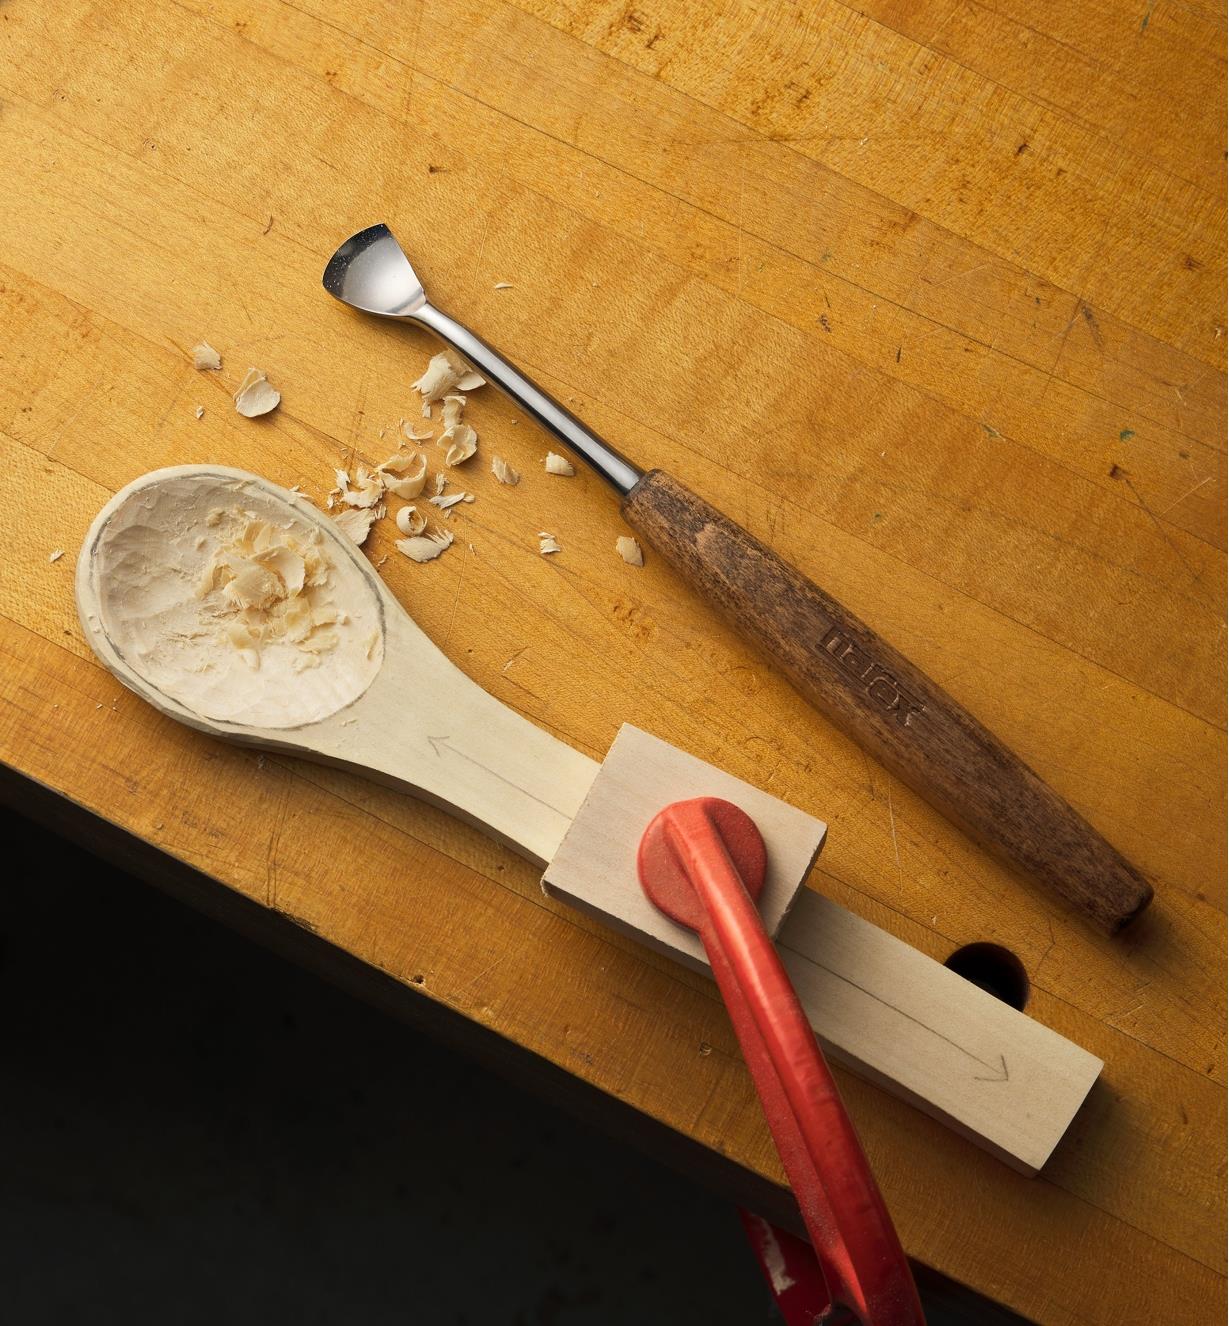 A partially finished wooden spoon clamped to a workbench and next to a carving chisel.